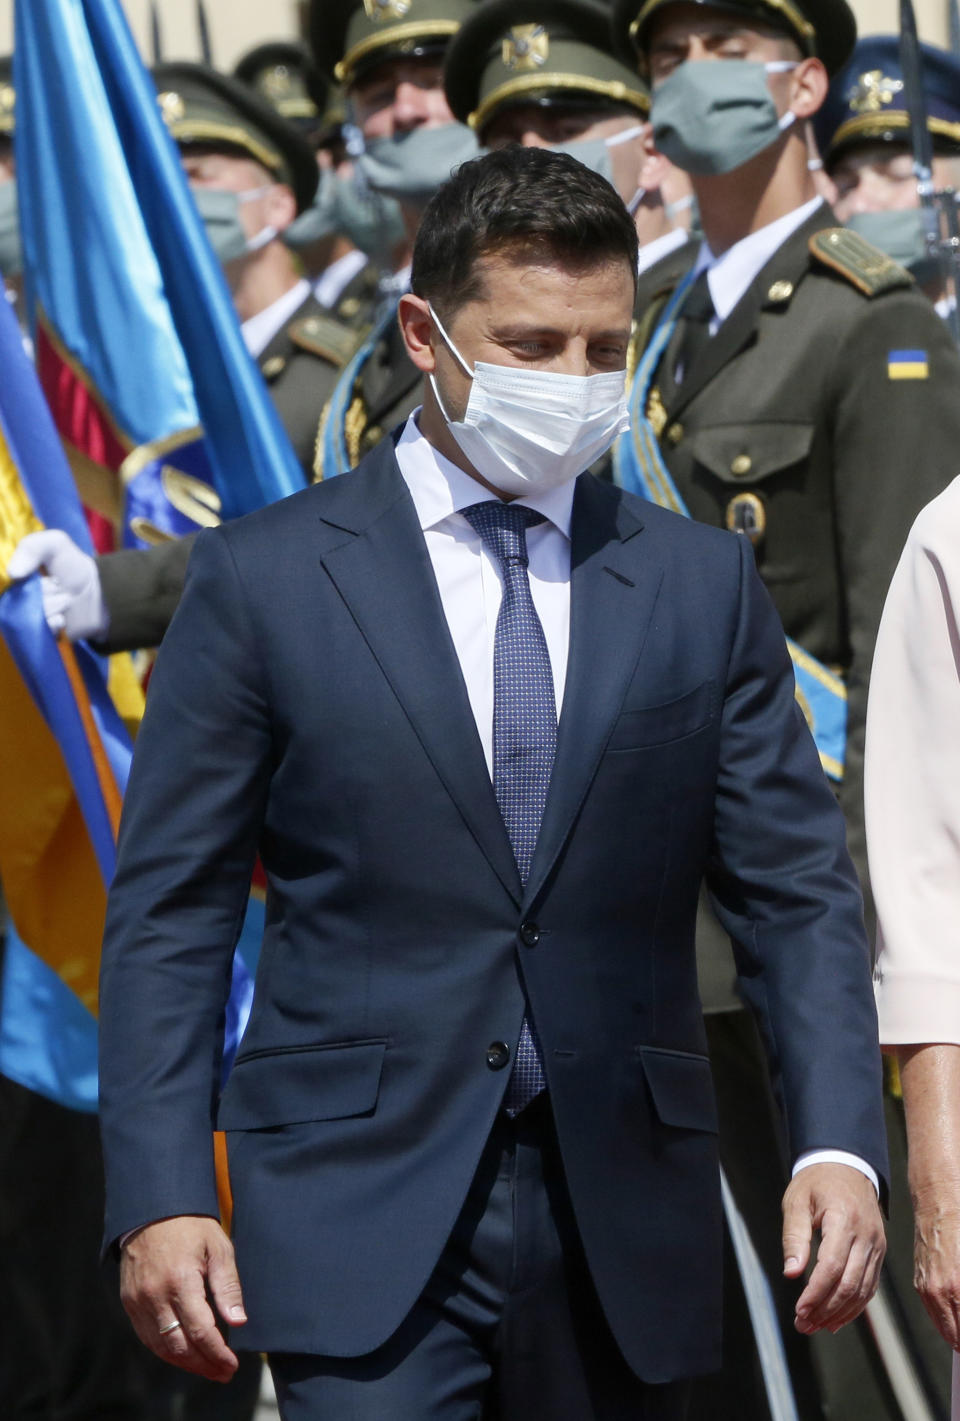 FILE - In this file photo dated Tuesday, July. 21, 2020, Ukrainian President Volodymyr Zelenskiy reviews the honor guard during a welcome ceremony in Kyiv, Ukraine. It is announced Monday Nov. 9, 2020, that Volodymyr Zelenskiy has tested positive for the COVID-19 coronavirus.(AP Photo/Efrem Lukatsky, FILE)